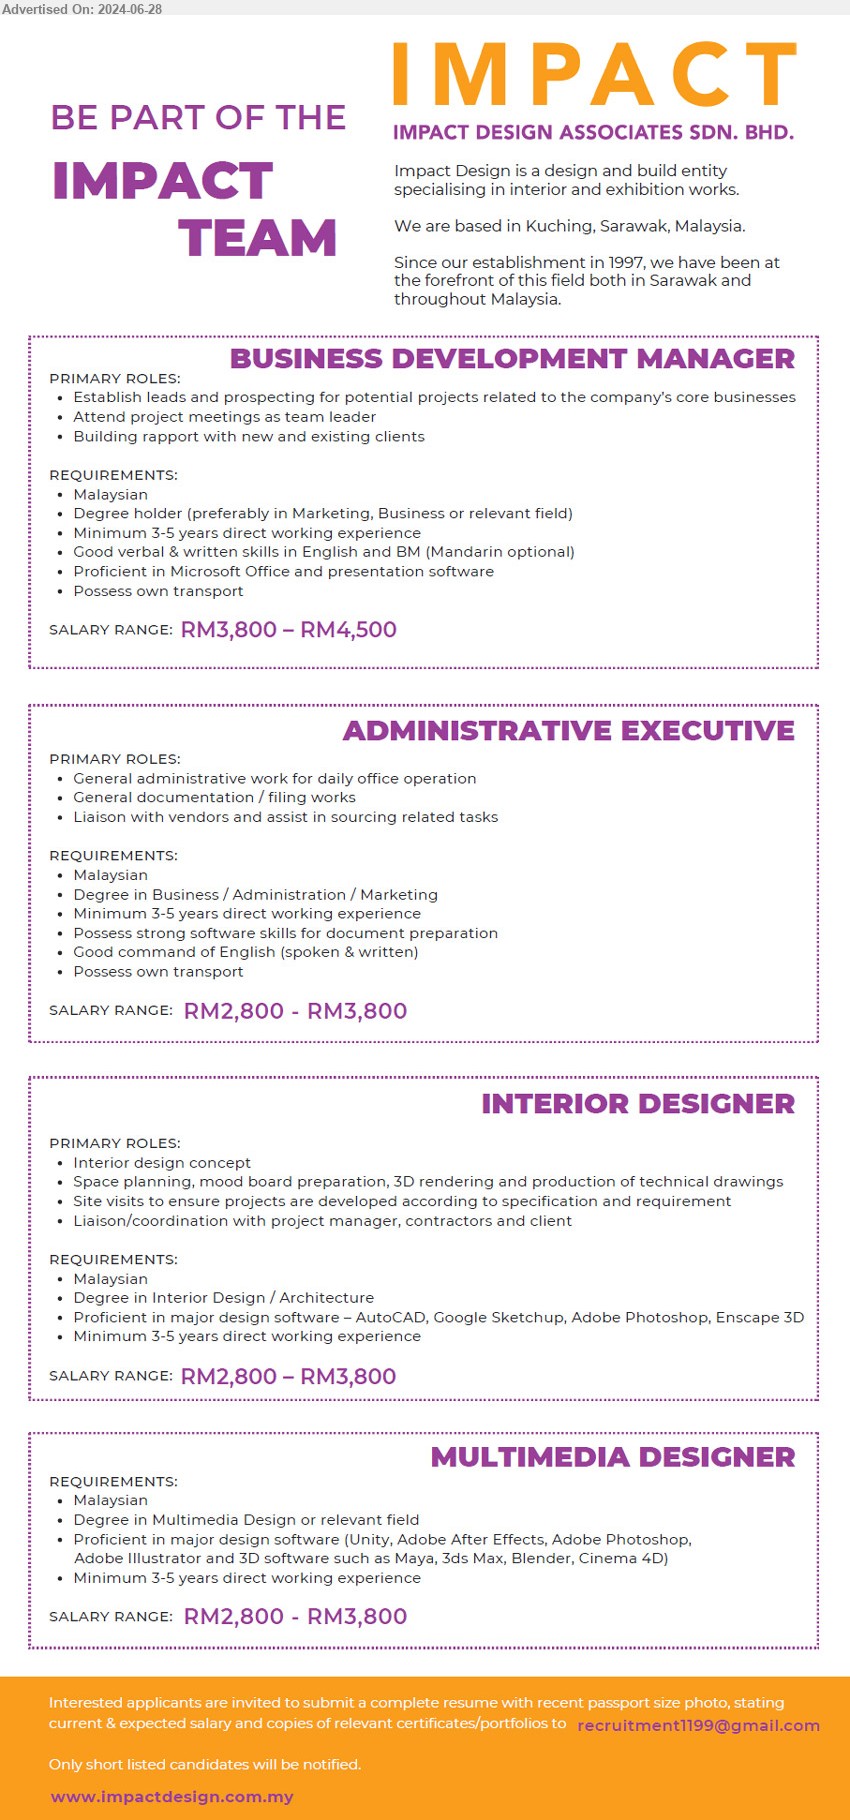 IMPACT DESIGN ASSOCIATES SDN BHD - 1. BUSINESS DEVELOPMENT MANAGER (Kuching), RM3,800-RM4,500, Degree holder (preferably in Marketing, Business or relevant field),...
2. ADMINISTRATIVE EXECUTIVE (Kuching), RM2,800-RM3,800, Degree in Business/Administration/Marketing, Possess strong software skills for document preparation,...
3. INTERIOR DESIGNER (Kuching), RM2,800-RM3,800, Degree in Interior Design/Architecture, Proficient in major design software - AutoCAD, Google Sketchup, Adobe Photoshop, Enscape 3D,...
4. MULTIMEDIA DESIGNER (Kuching), RM2,800-RM3,800, Degree in Multimedia Design, Proficient in major design software (Unity, Adobe After Effects, Adobe Photoshop, Adobe Illustrator and 3D software such as Maye, 3ds Max, Blender, Cinema 4D)...
Email resume to ...